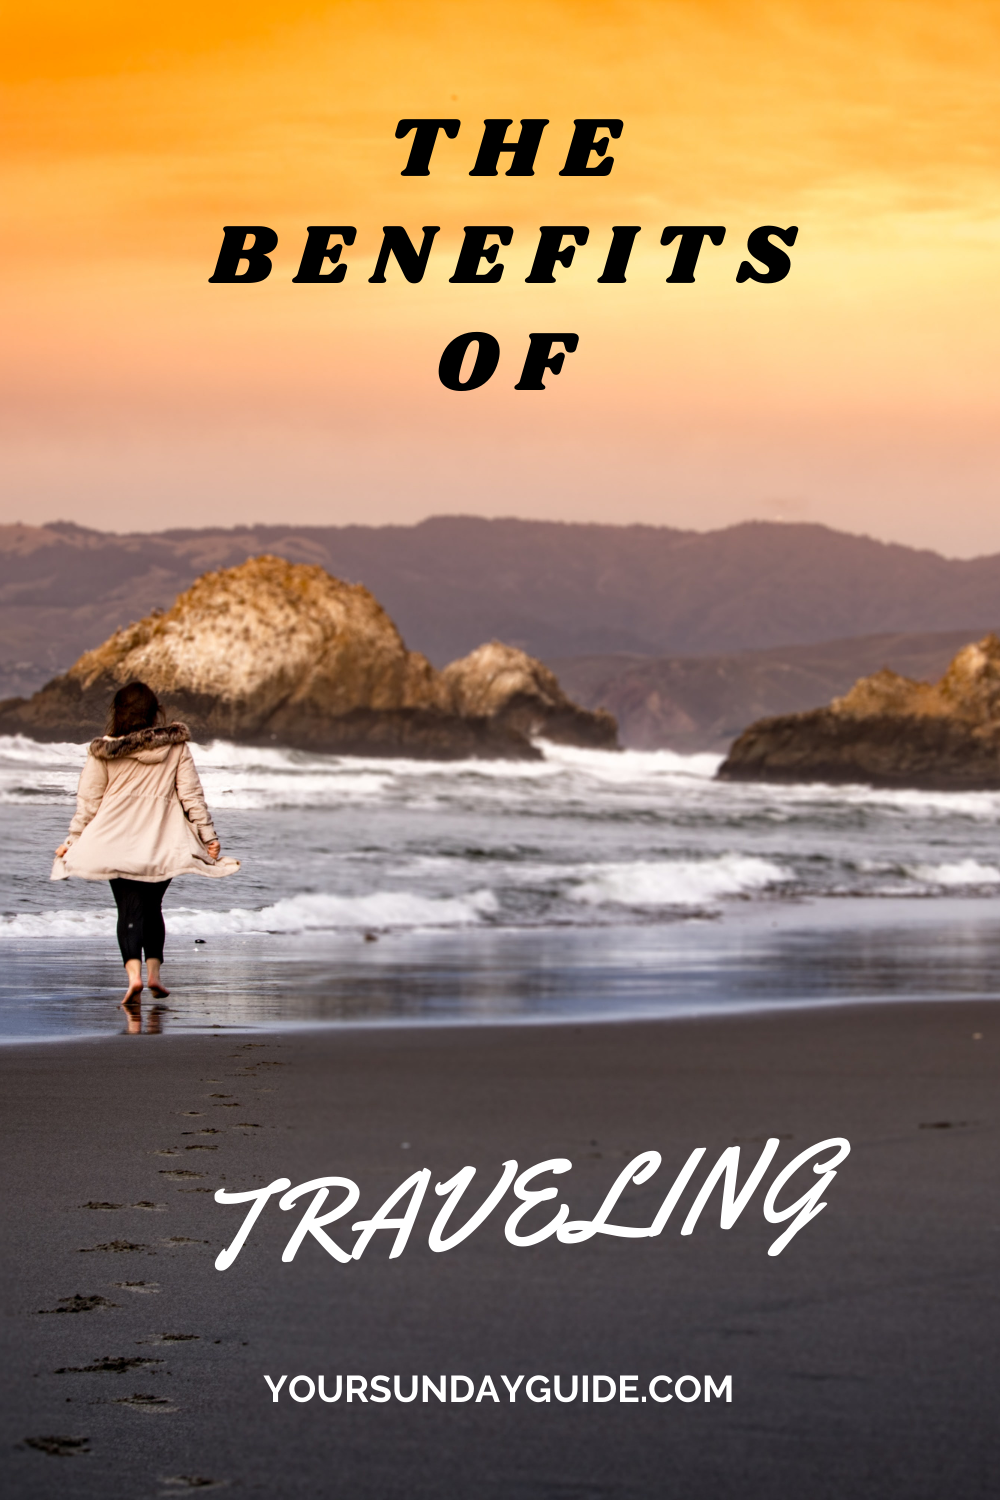 The benefits of traveling